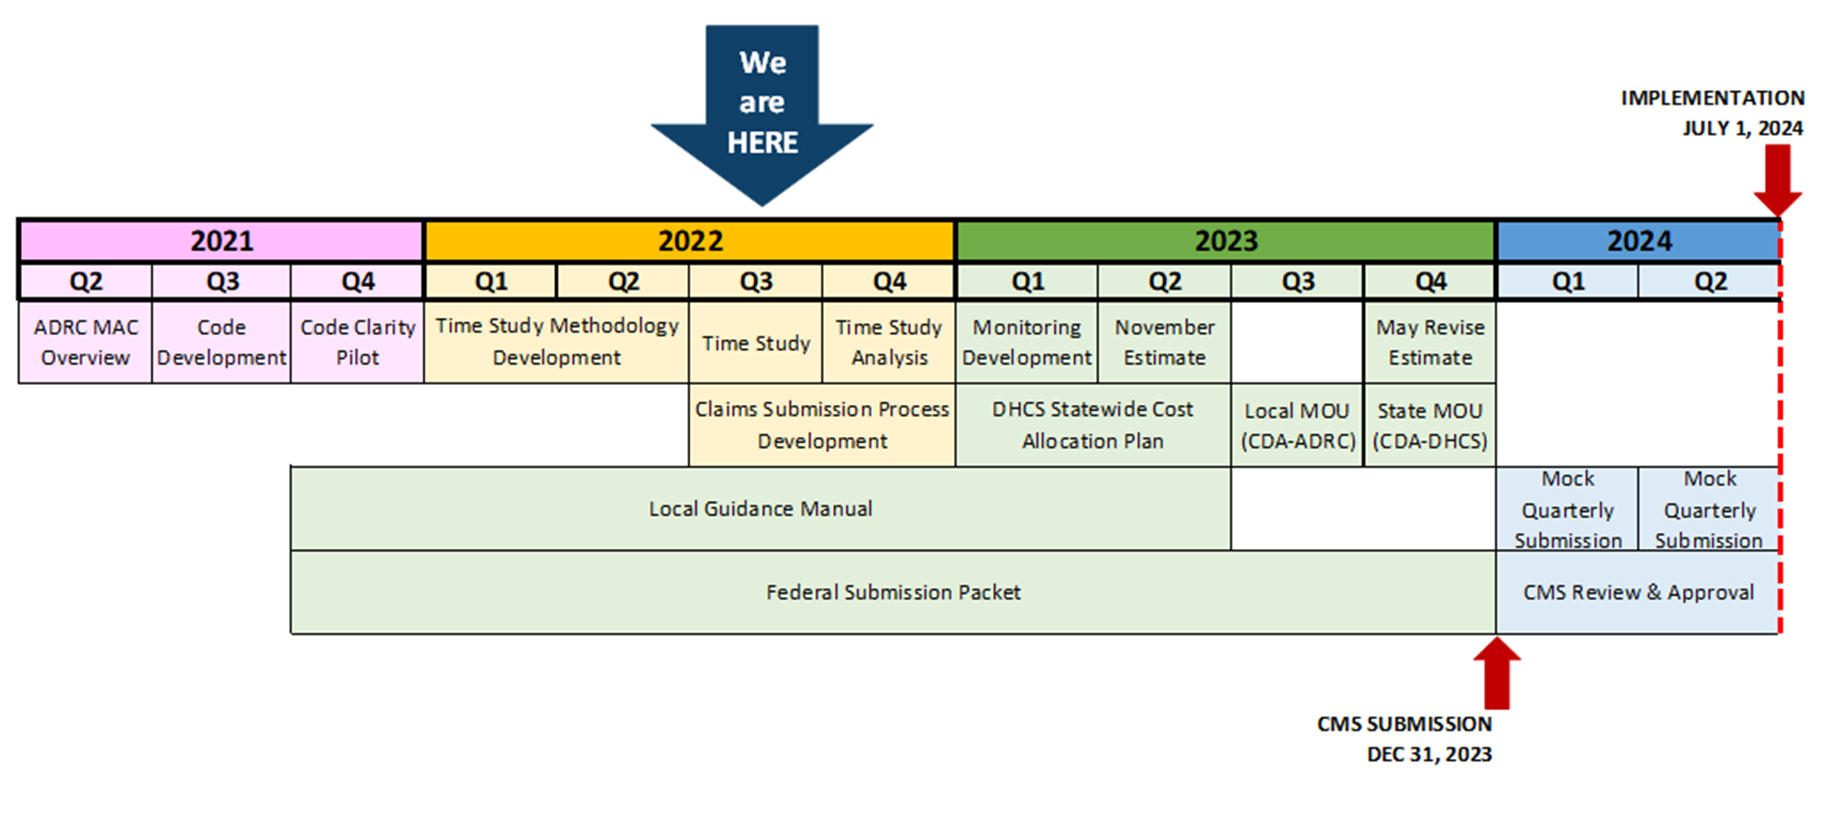 This is an image of a timeline which outlines the major tasks that need to be completed in order to meet the 
                                July 1, 2024 implementation date for Medicaid Administrative Claiming. In calendar year 2021, an ADRC Medicaid 
                                Administrative Claiming overview training will be take place in quarter 2, codes will be developed in quarter 3, 
                                and a code clarity pilot will take place in quarter 4. For calendar year 2022, the time study methodology will be 
                                developed in quarters 1 and 2, the time study will take place in quarter 3, and the time study analysis will be 
                                conducted in quarter 4. The claims submission process will also be developed in quarters 3 and 4. In calendar year 
                                2023, monitoring processes will be developed in quarter 1, the November estimate will be completed in quarter 2, 
                                and the May revision estimate will be completed in quarter 4. Also, the DHCS statewide cost allocation plan will 
                                be updated in quarters 1 and 2, the local memorandum of understanding between CDA and ADRC partners will be drafted 
                                in quarter 3, and the state memorandum of understanding between CDA and DHCS will be drafted in quarter 4. 
                                The local guidance manual and federal submission packets will be developed simultaneously throughout calendar 
                                years 2021, 2022, and 2023. The federal packet to CMS will be submitted by December 31, 2023 to allow 6 months 
                                for review and approval prior to full implementation by July 1, 2024. During calendar year 2024, while awaiting 
                                review and approval by CMS, mock quarterly submissions will be conducted during quarters 1 and 2. Finally, there 
                                is an arrow over quarter 3 of 2021 indicating that we are currently are in the code development stage.